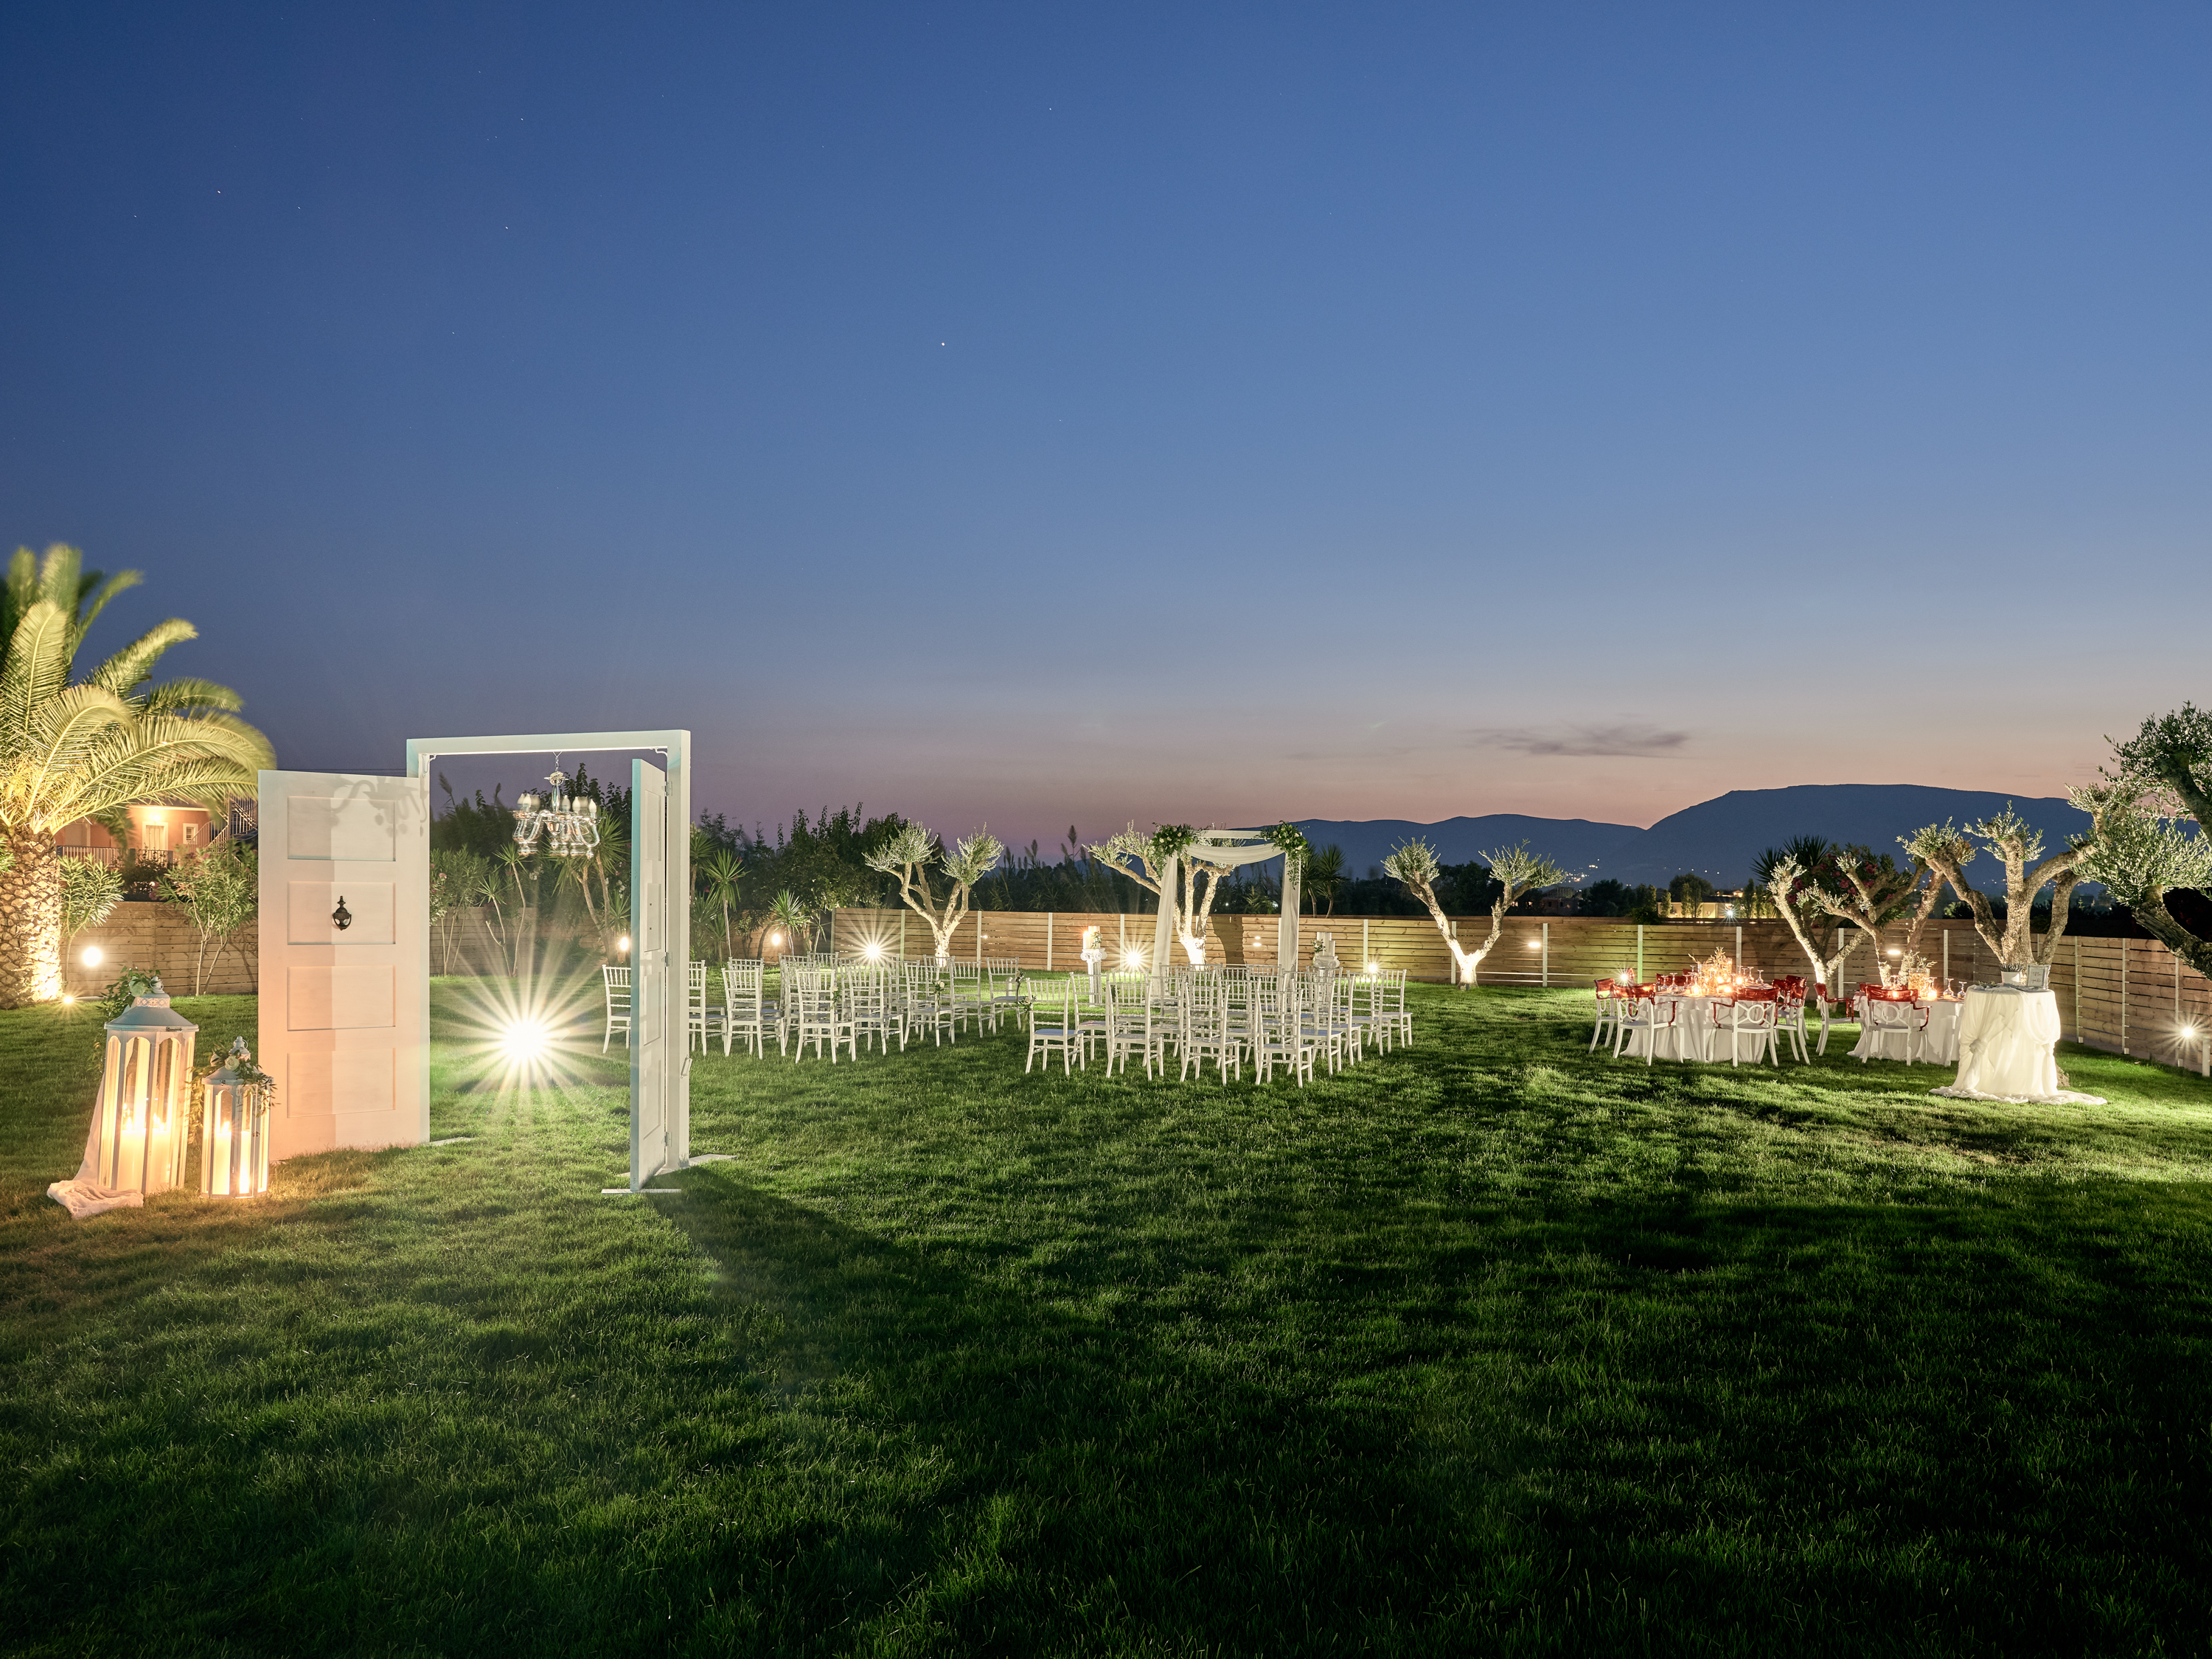 Book your wedding day in Meandros Boutique & Spa Hotel